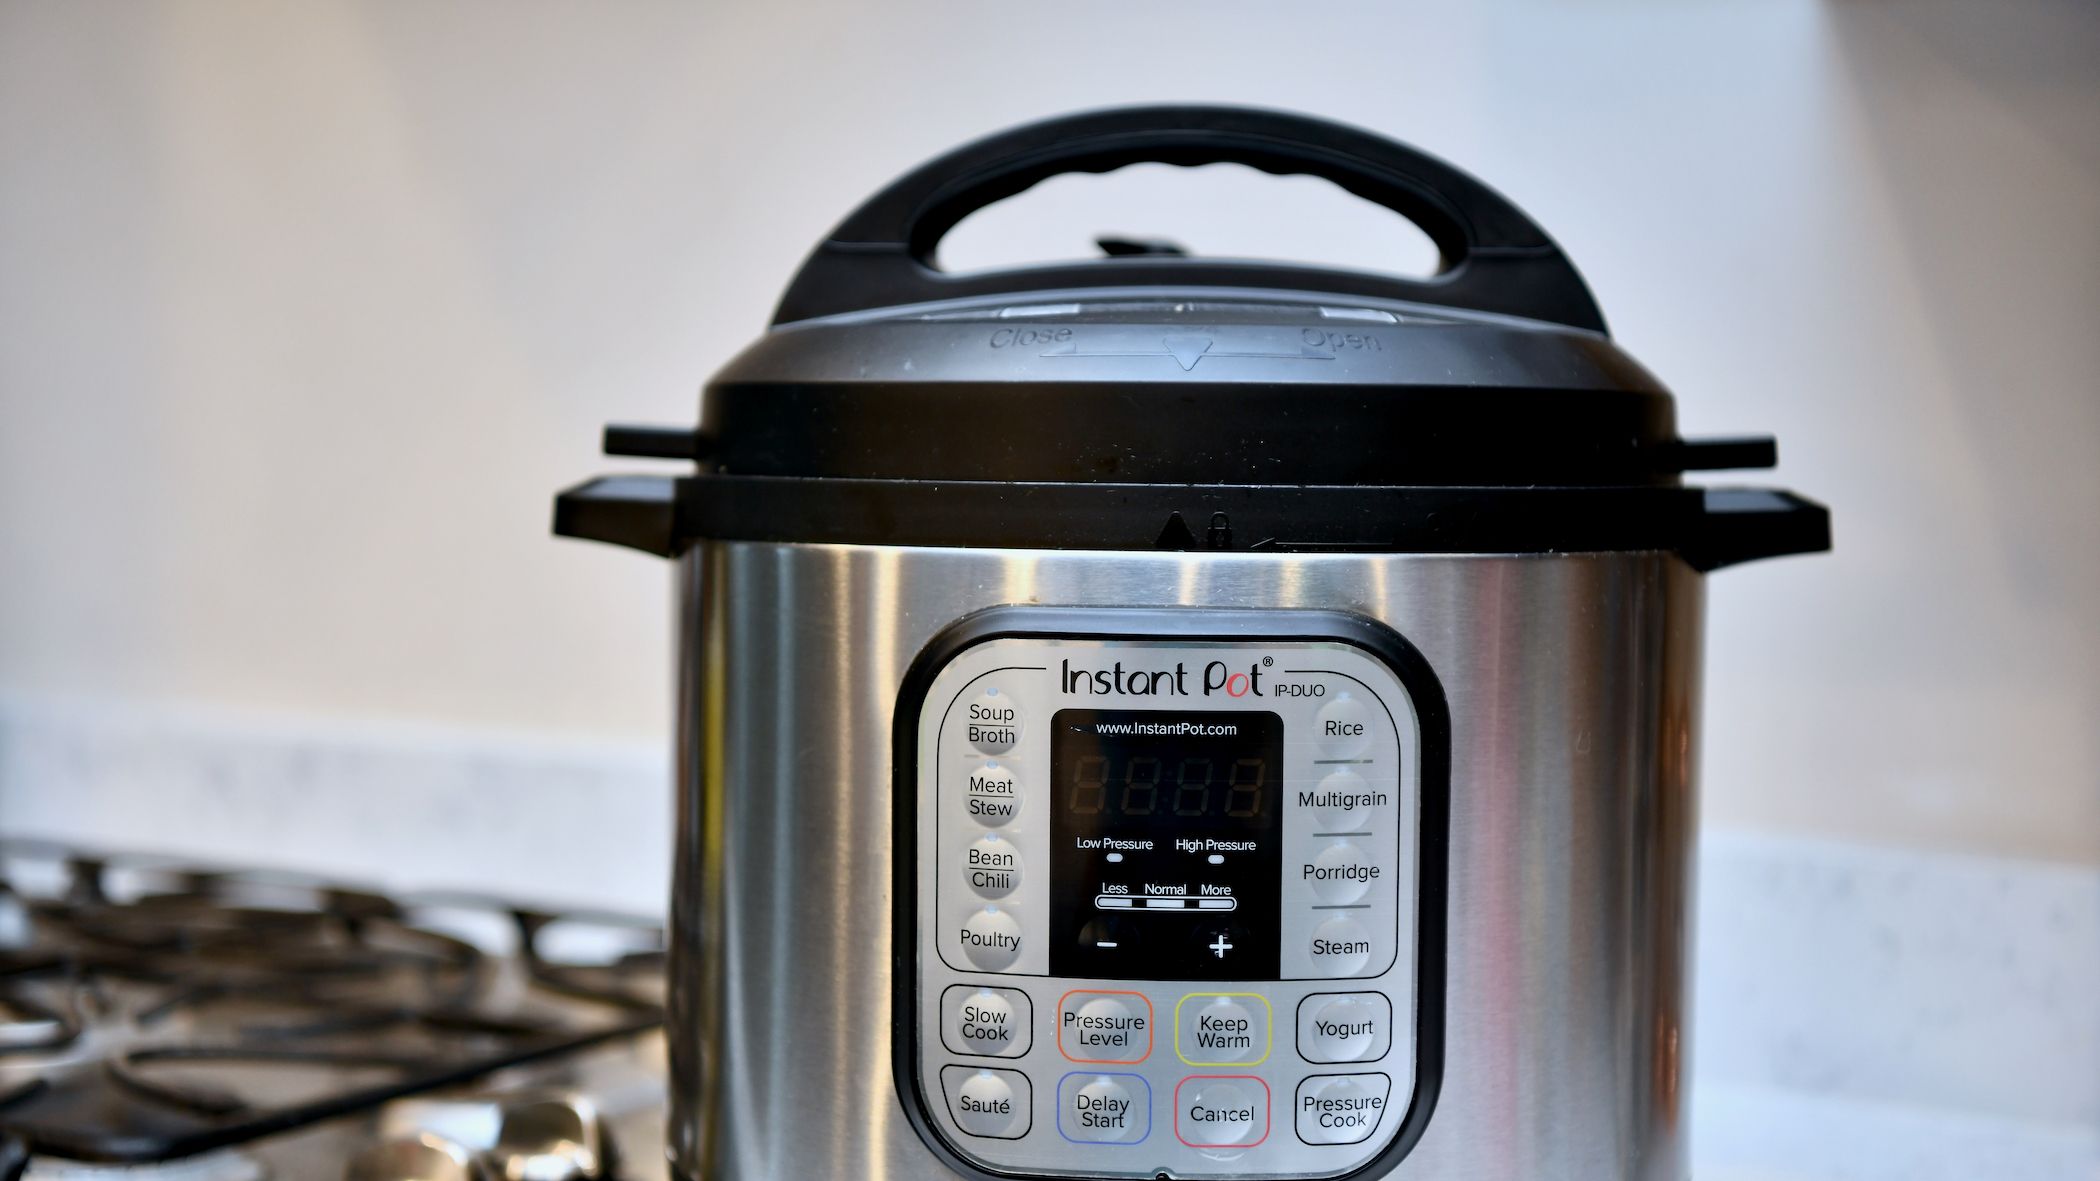 Everything You Wanted to Know About the Instant Pot